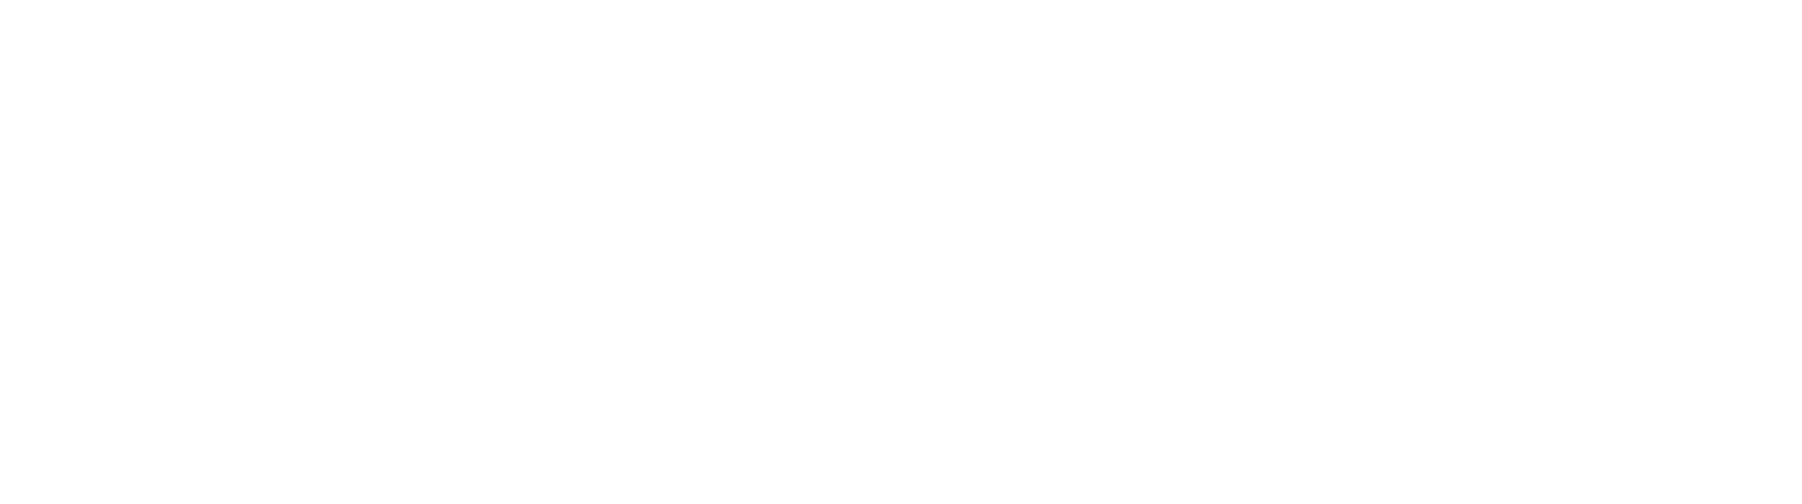 NYSCA Logo White.png